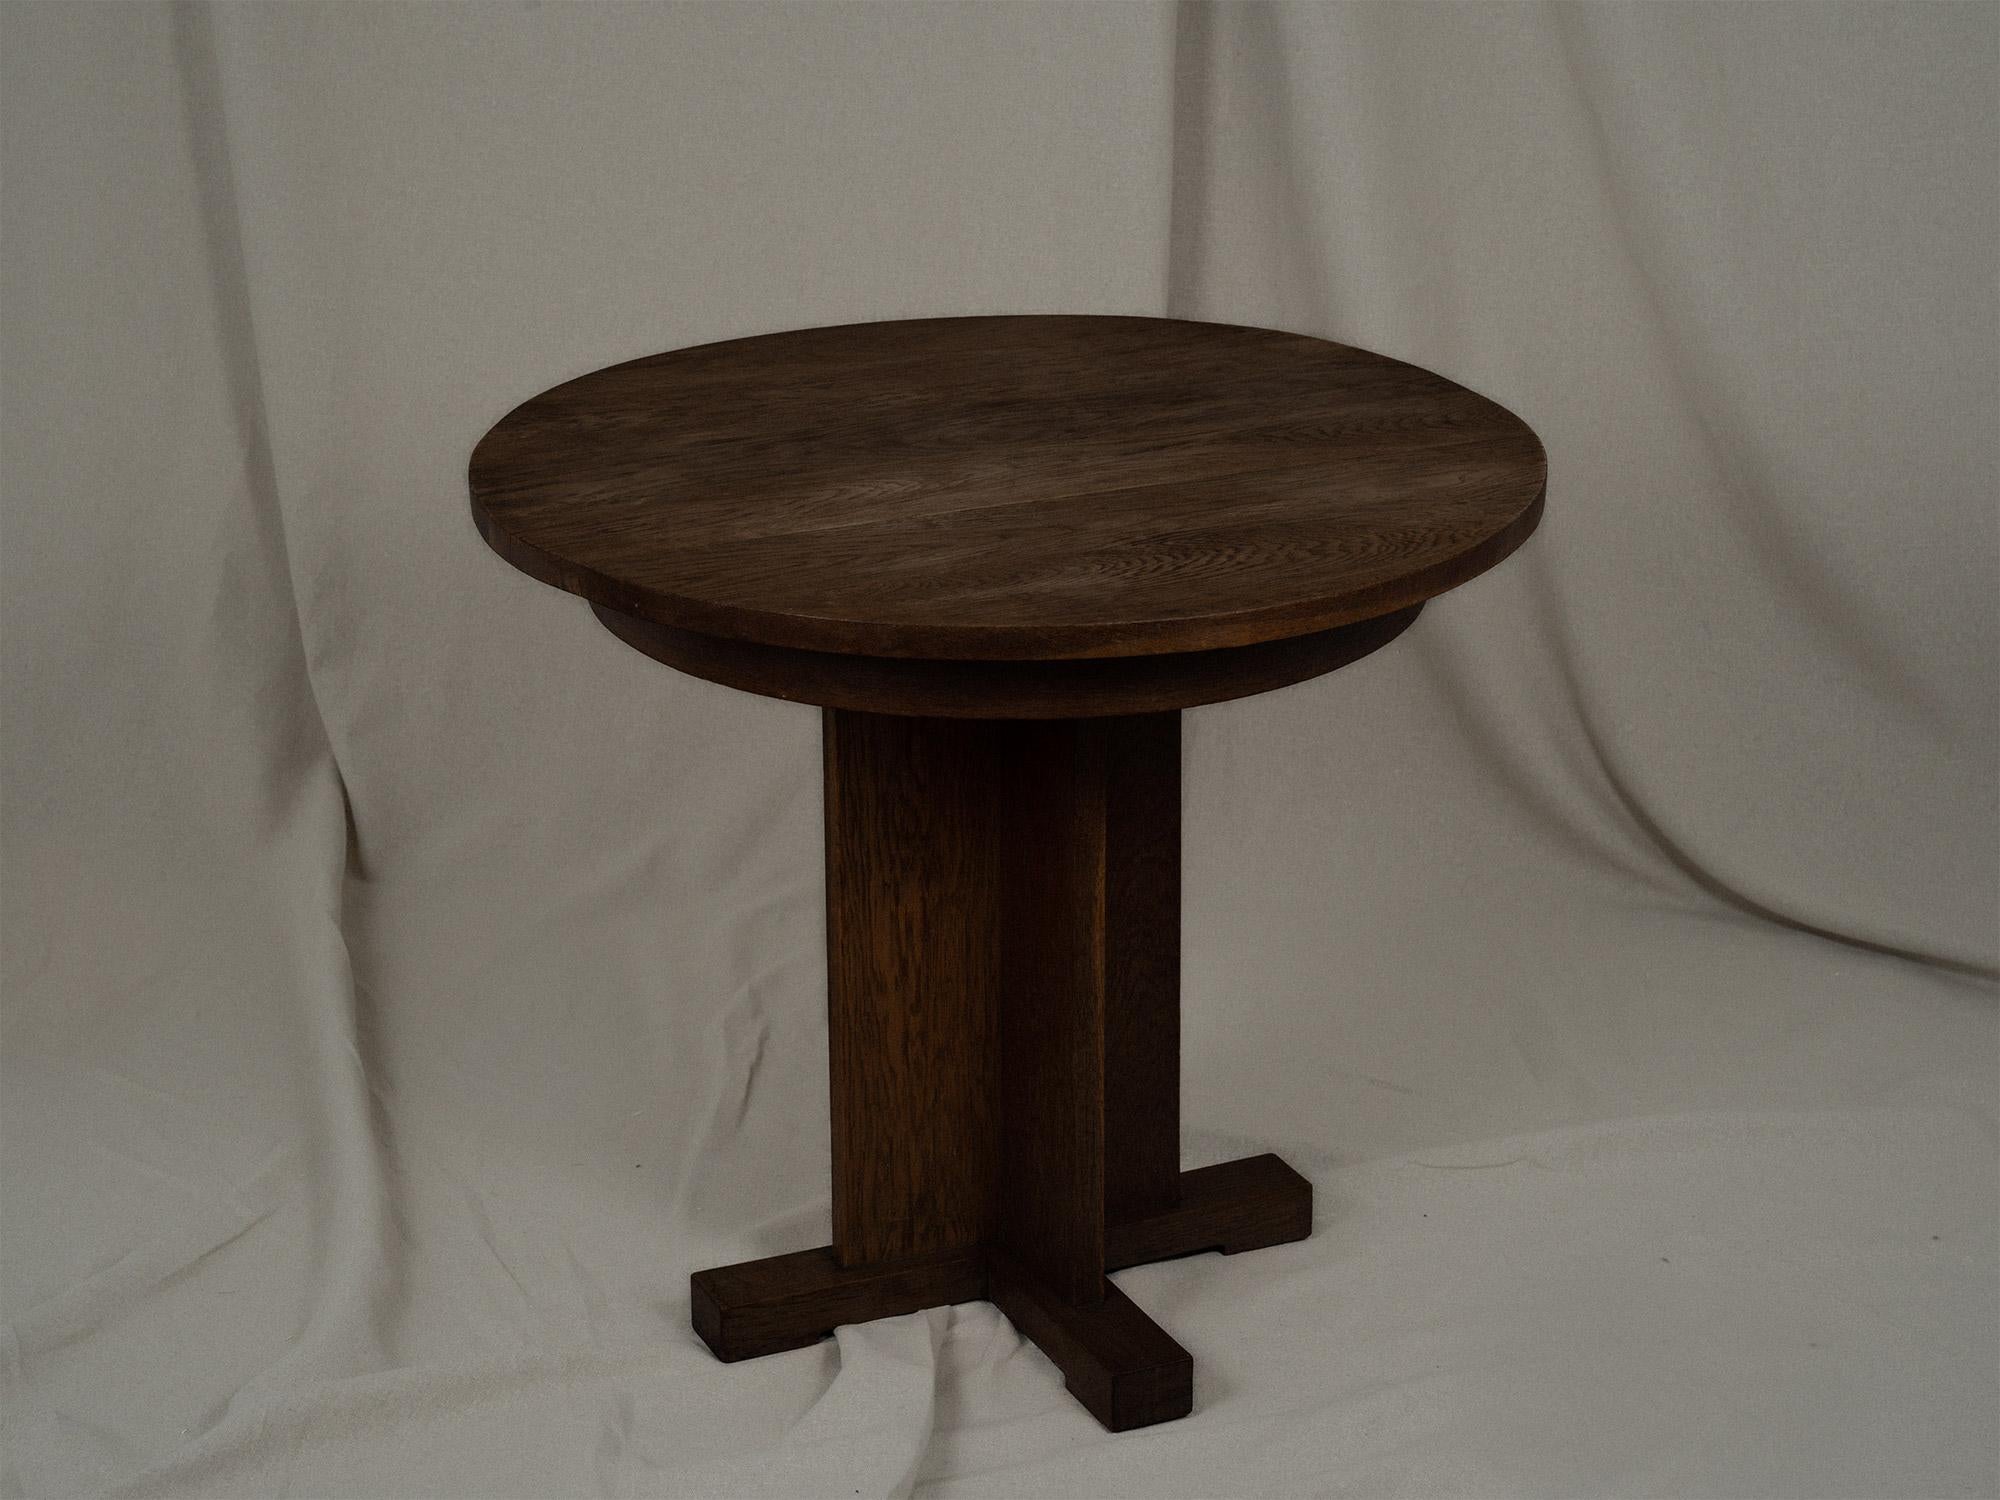 Art deco style Sculptural round wooden side Table In Good Condition For Sale In 'S-HERTOGENBOSCH, NL